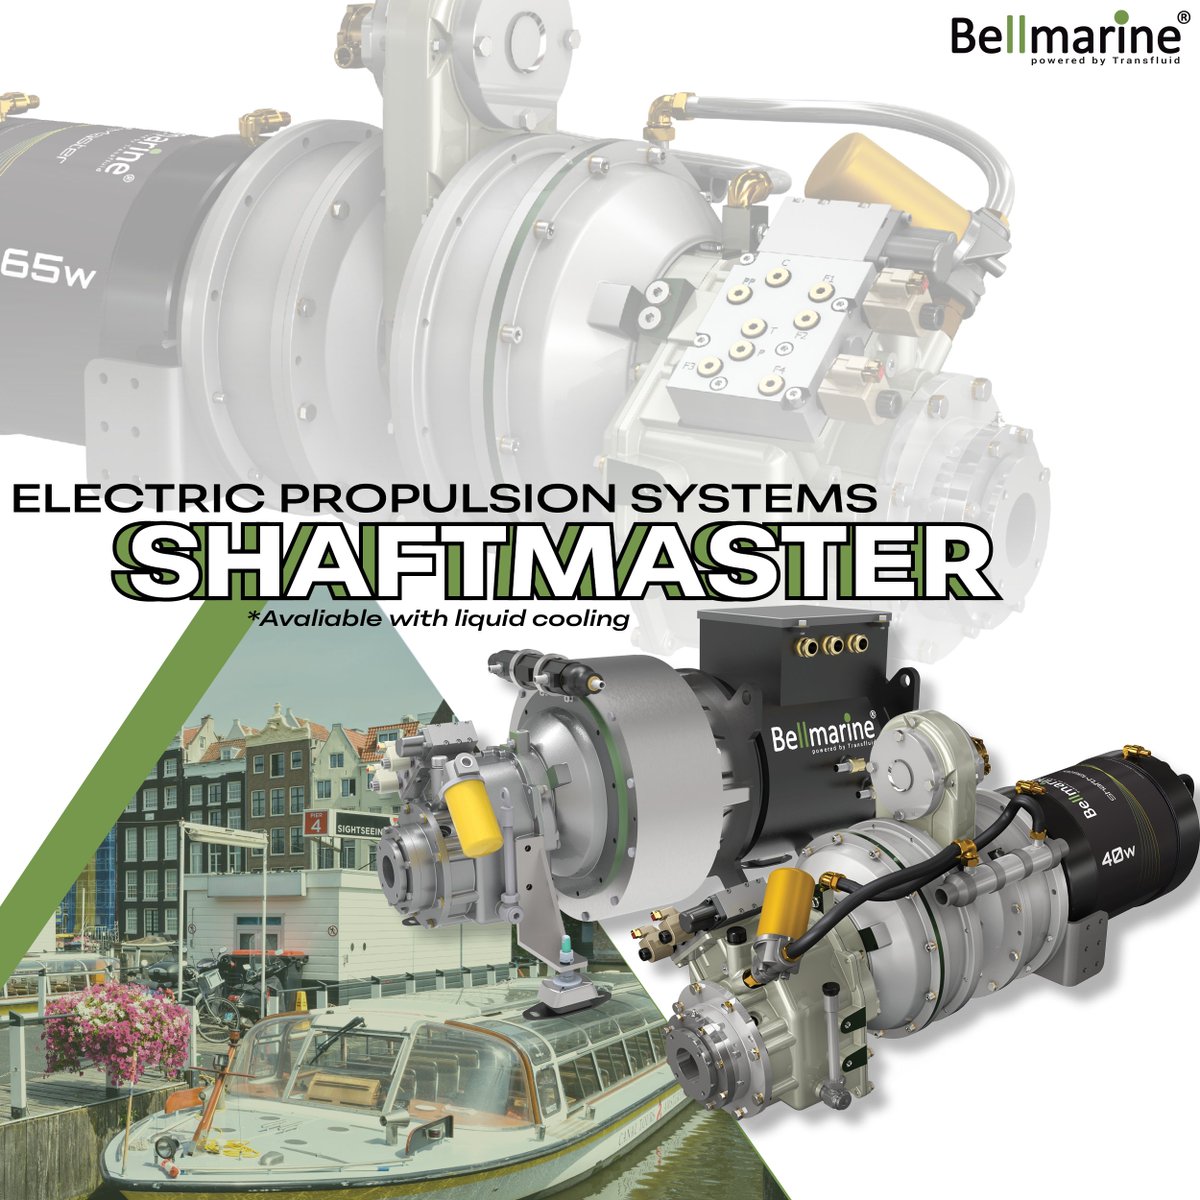 Sail GREENER with Bellmarine's SHAFTMASTER (powered by Transfluid)

The SHAFTMASTER is made up of permanent magnet motors with mechanical marine gear with various gears available for every need.

#bellmarine #sailwithus #poweredbytransfluid #electricpropulsion #greentechnology